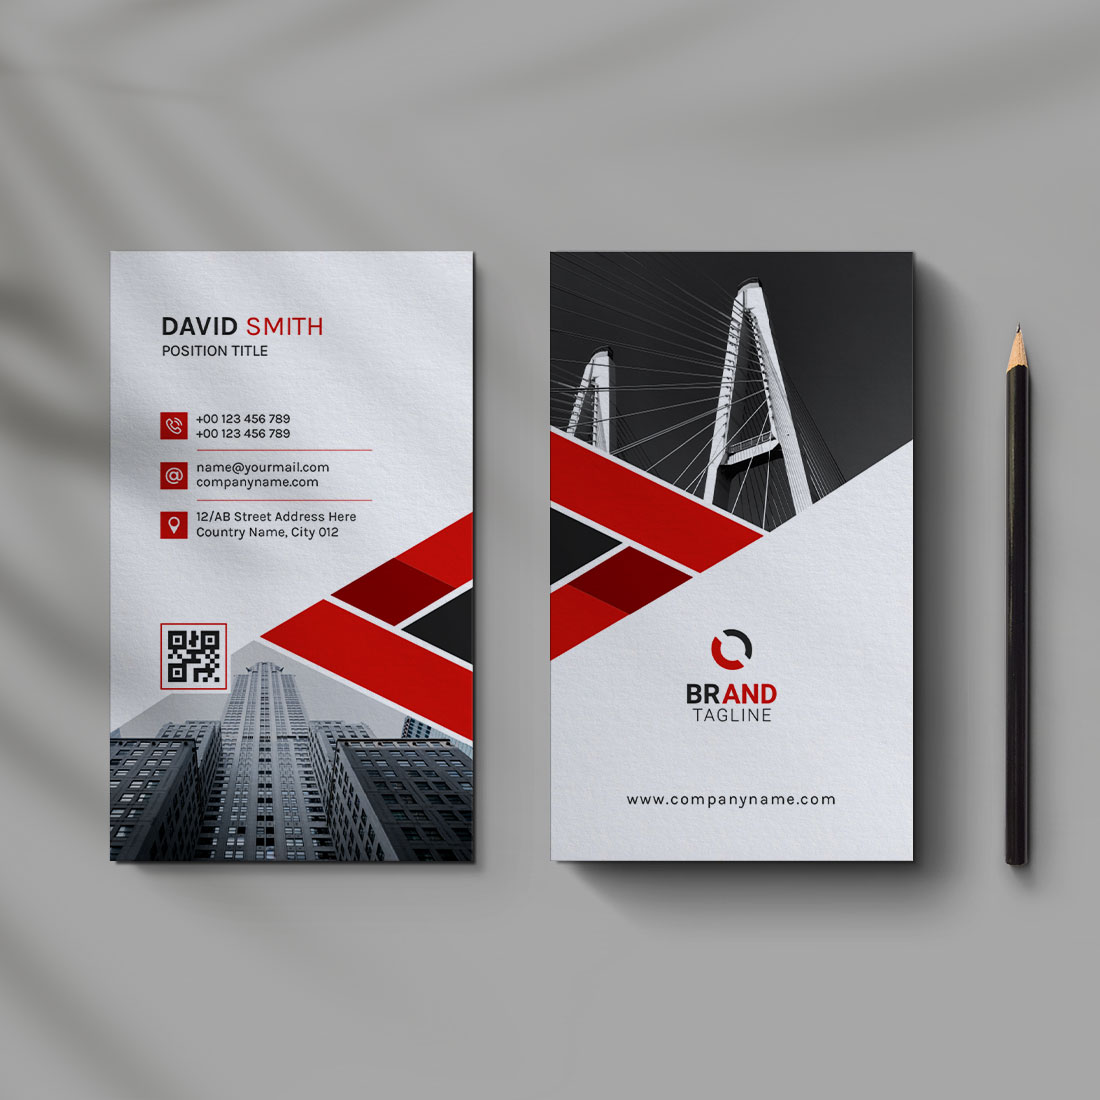 Creative and modern vertical business card design template cover image.